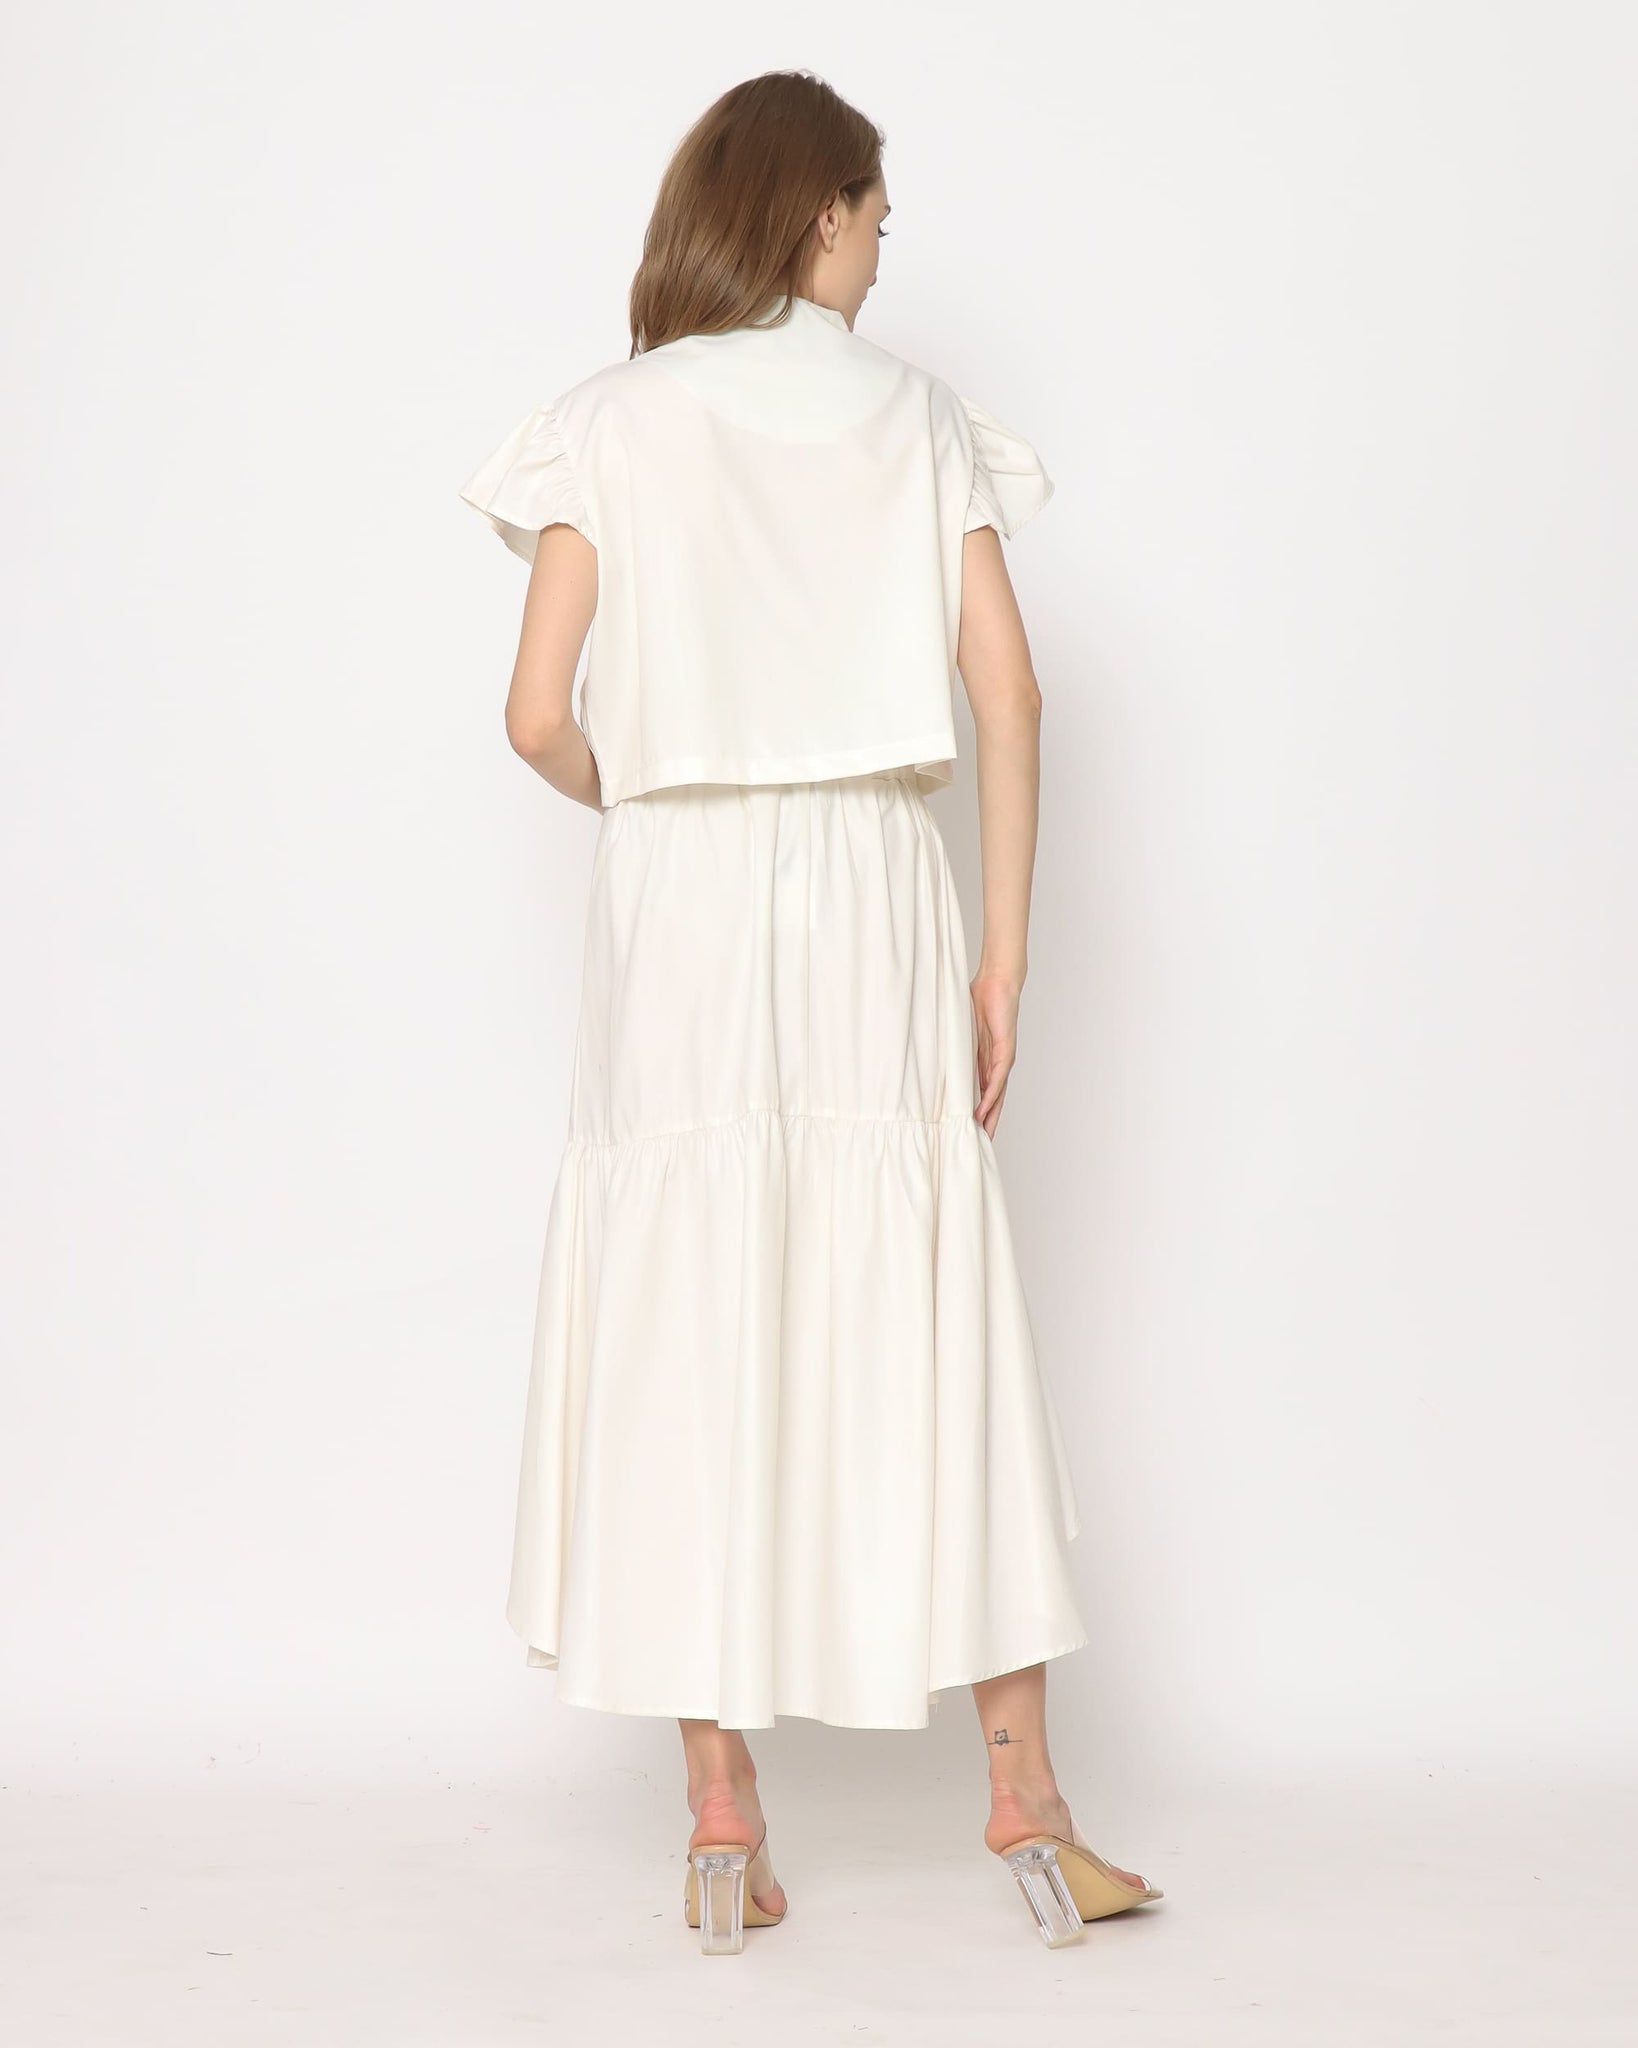 Monique. Fluff Sleeve Top with Side Pocket - White